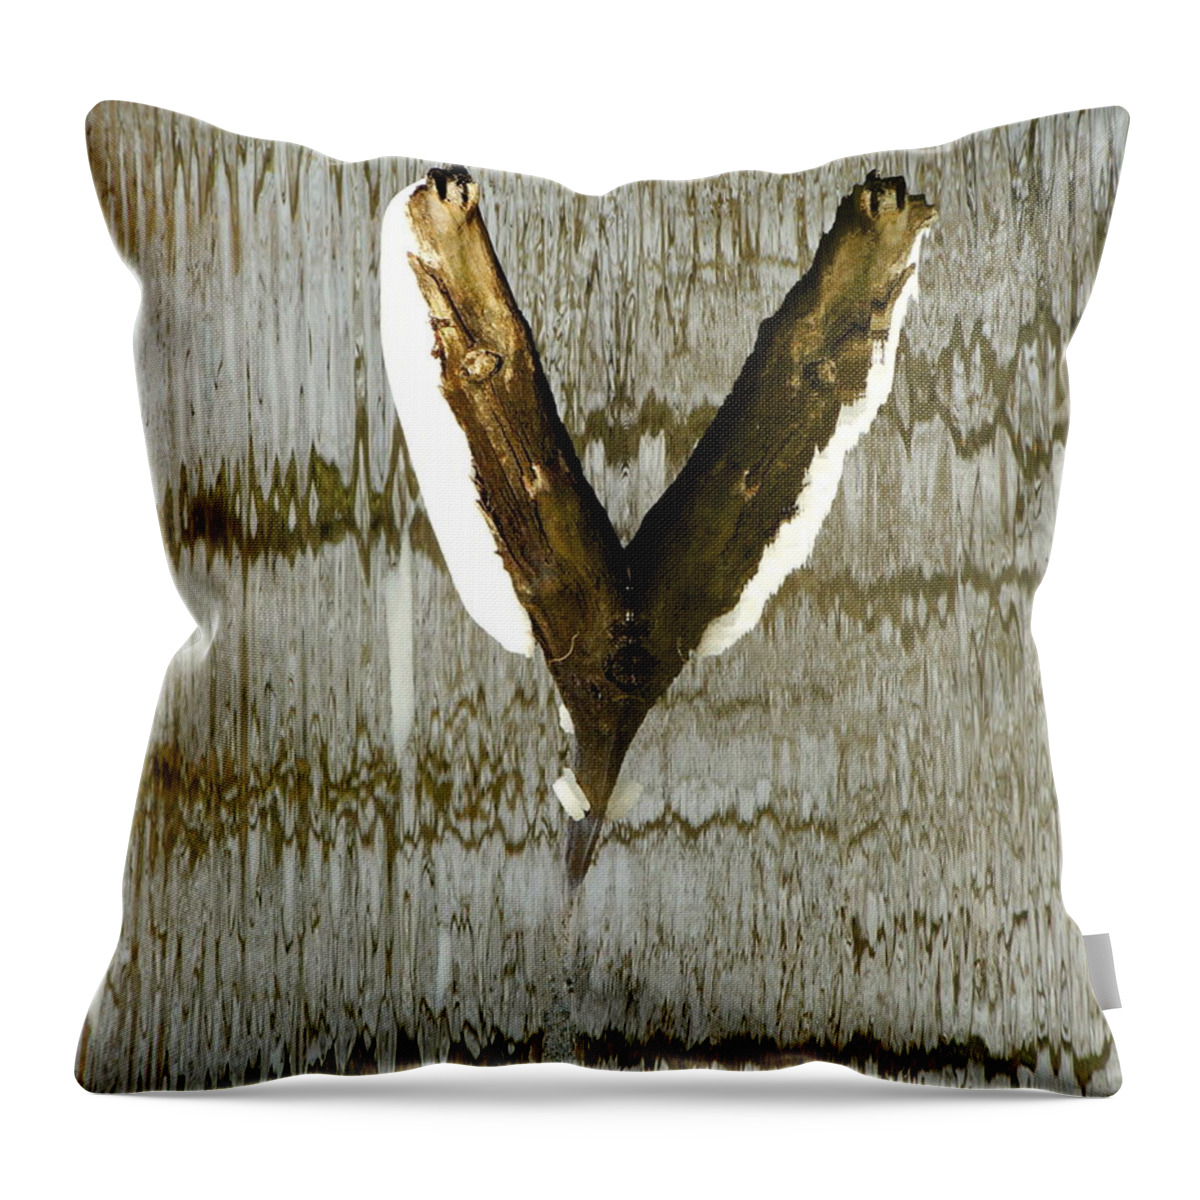 Abstract Throw Pillow featuring the photograph Eagle Wings by Marcia Lee Jones